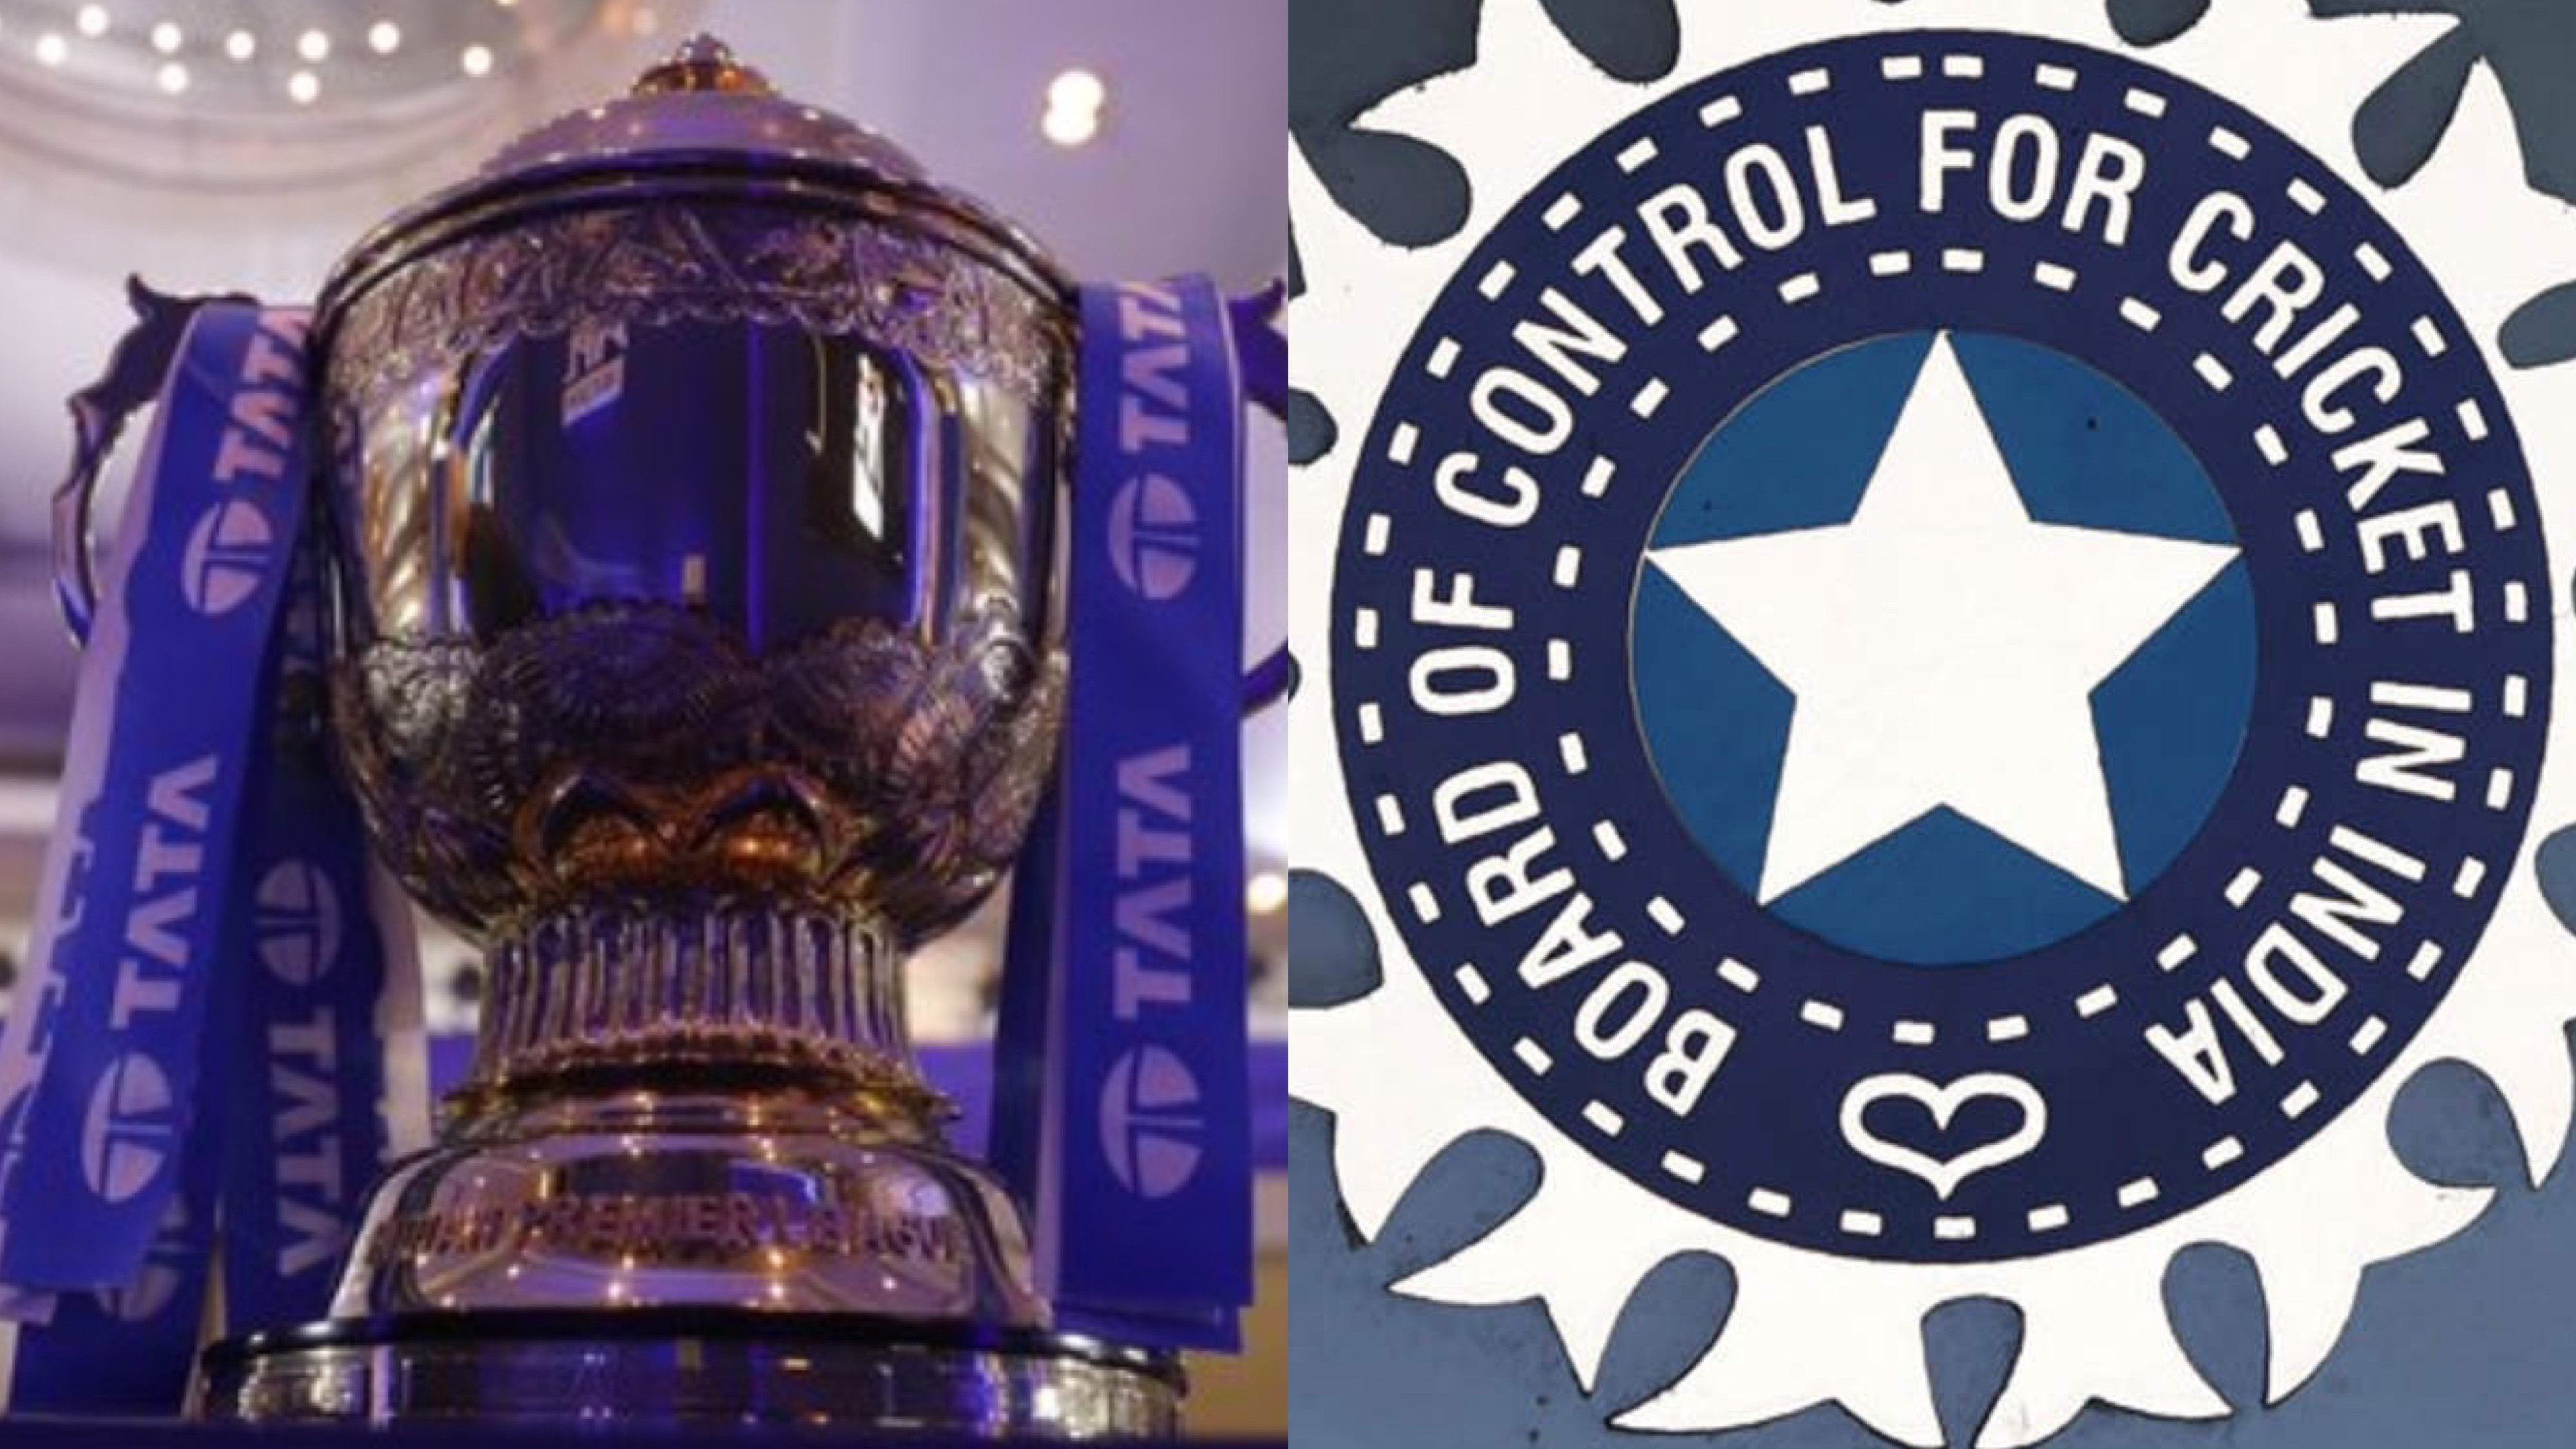 IPL 2022 likely to be held across six venues in Mumbai, Pune and Ahmedabad: Report